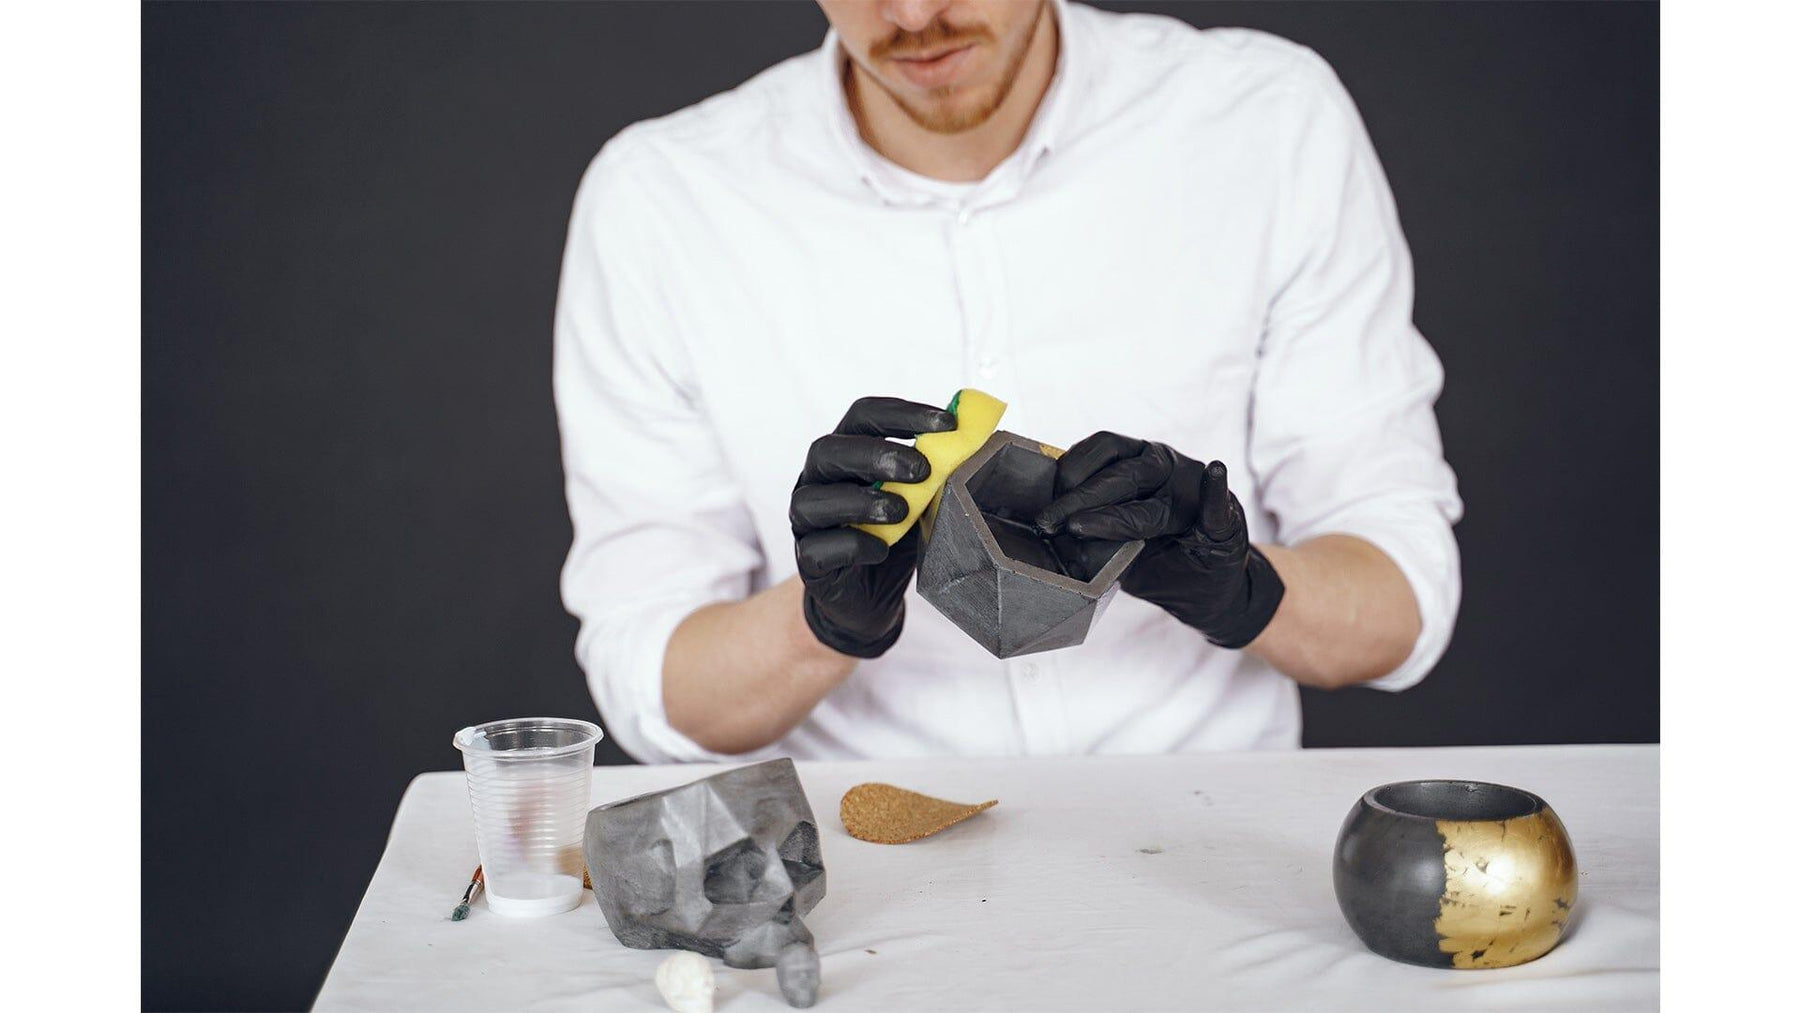 DIY Home Repairs and Disposable Gloves: Protecting Hands and Health